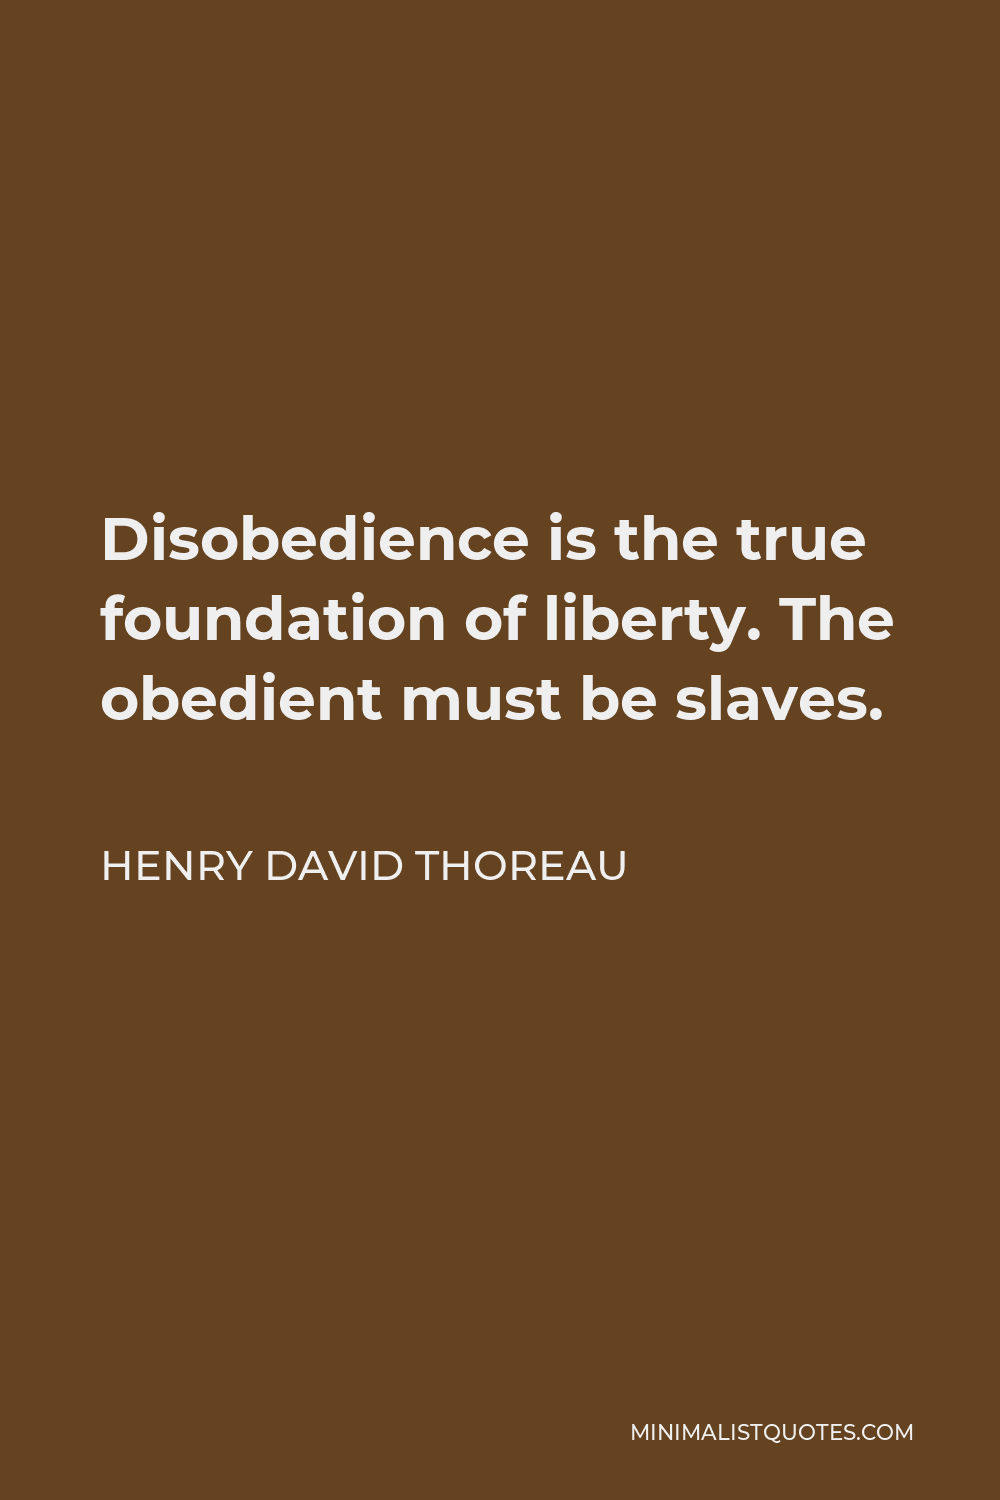 Henry David Thoreau Quote - Disobedience is the true foundation of liberty. The obedient must be slaves.